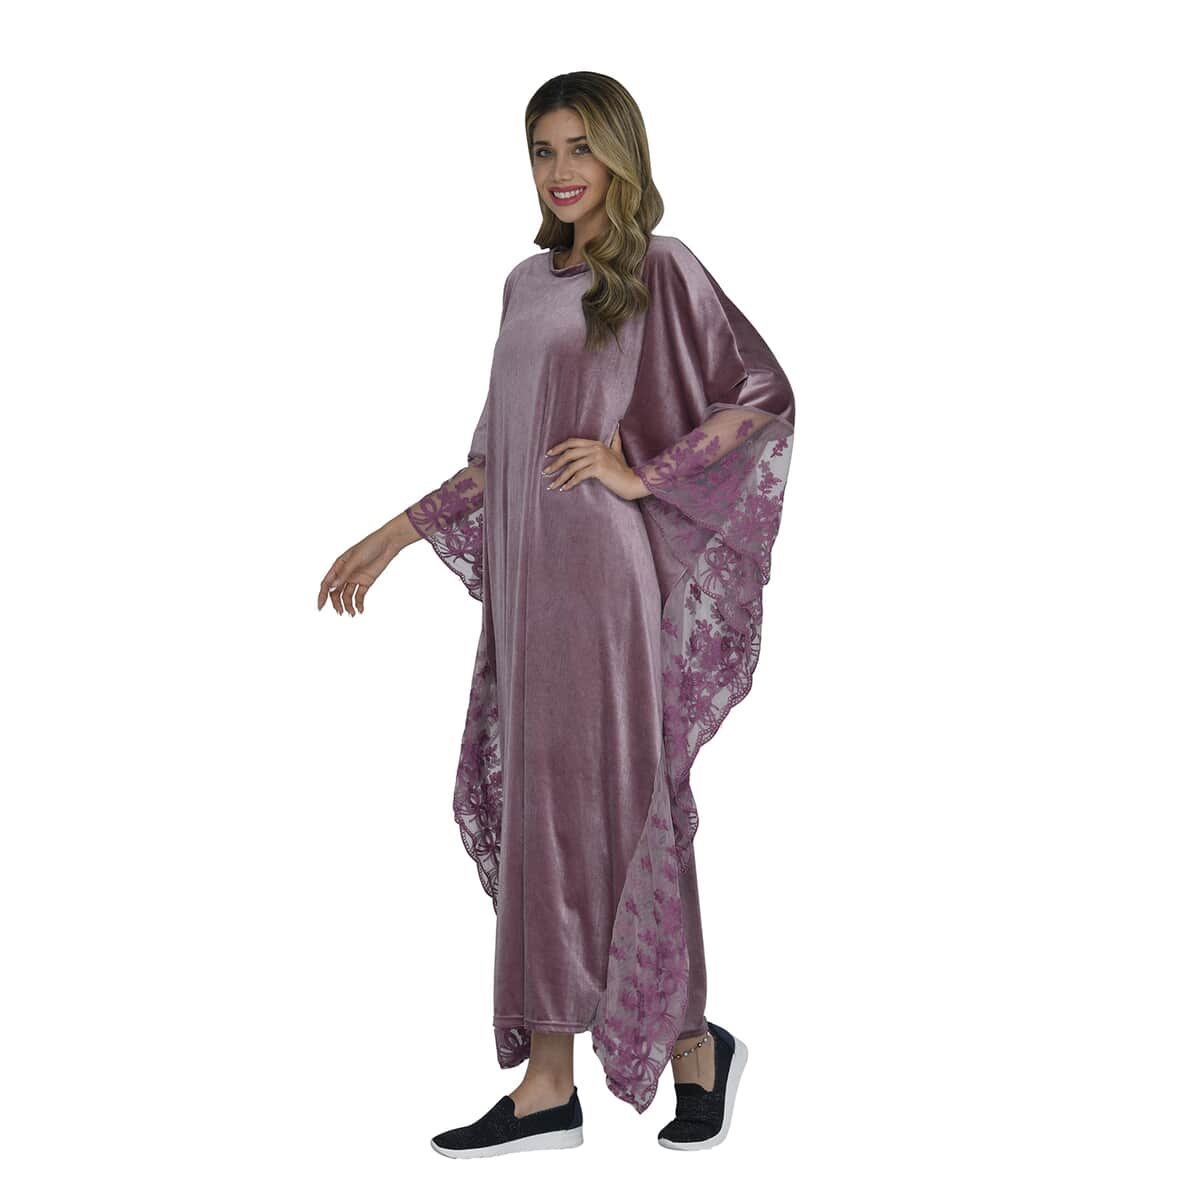 Tamsy Black Label - Lux Stretch Velvet Kaftan with Lace in Vintage Rose - One Size Fits Most image number 2